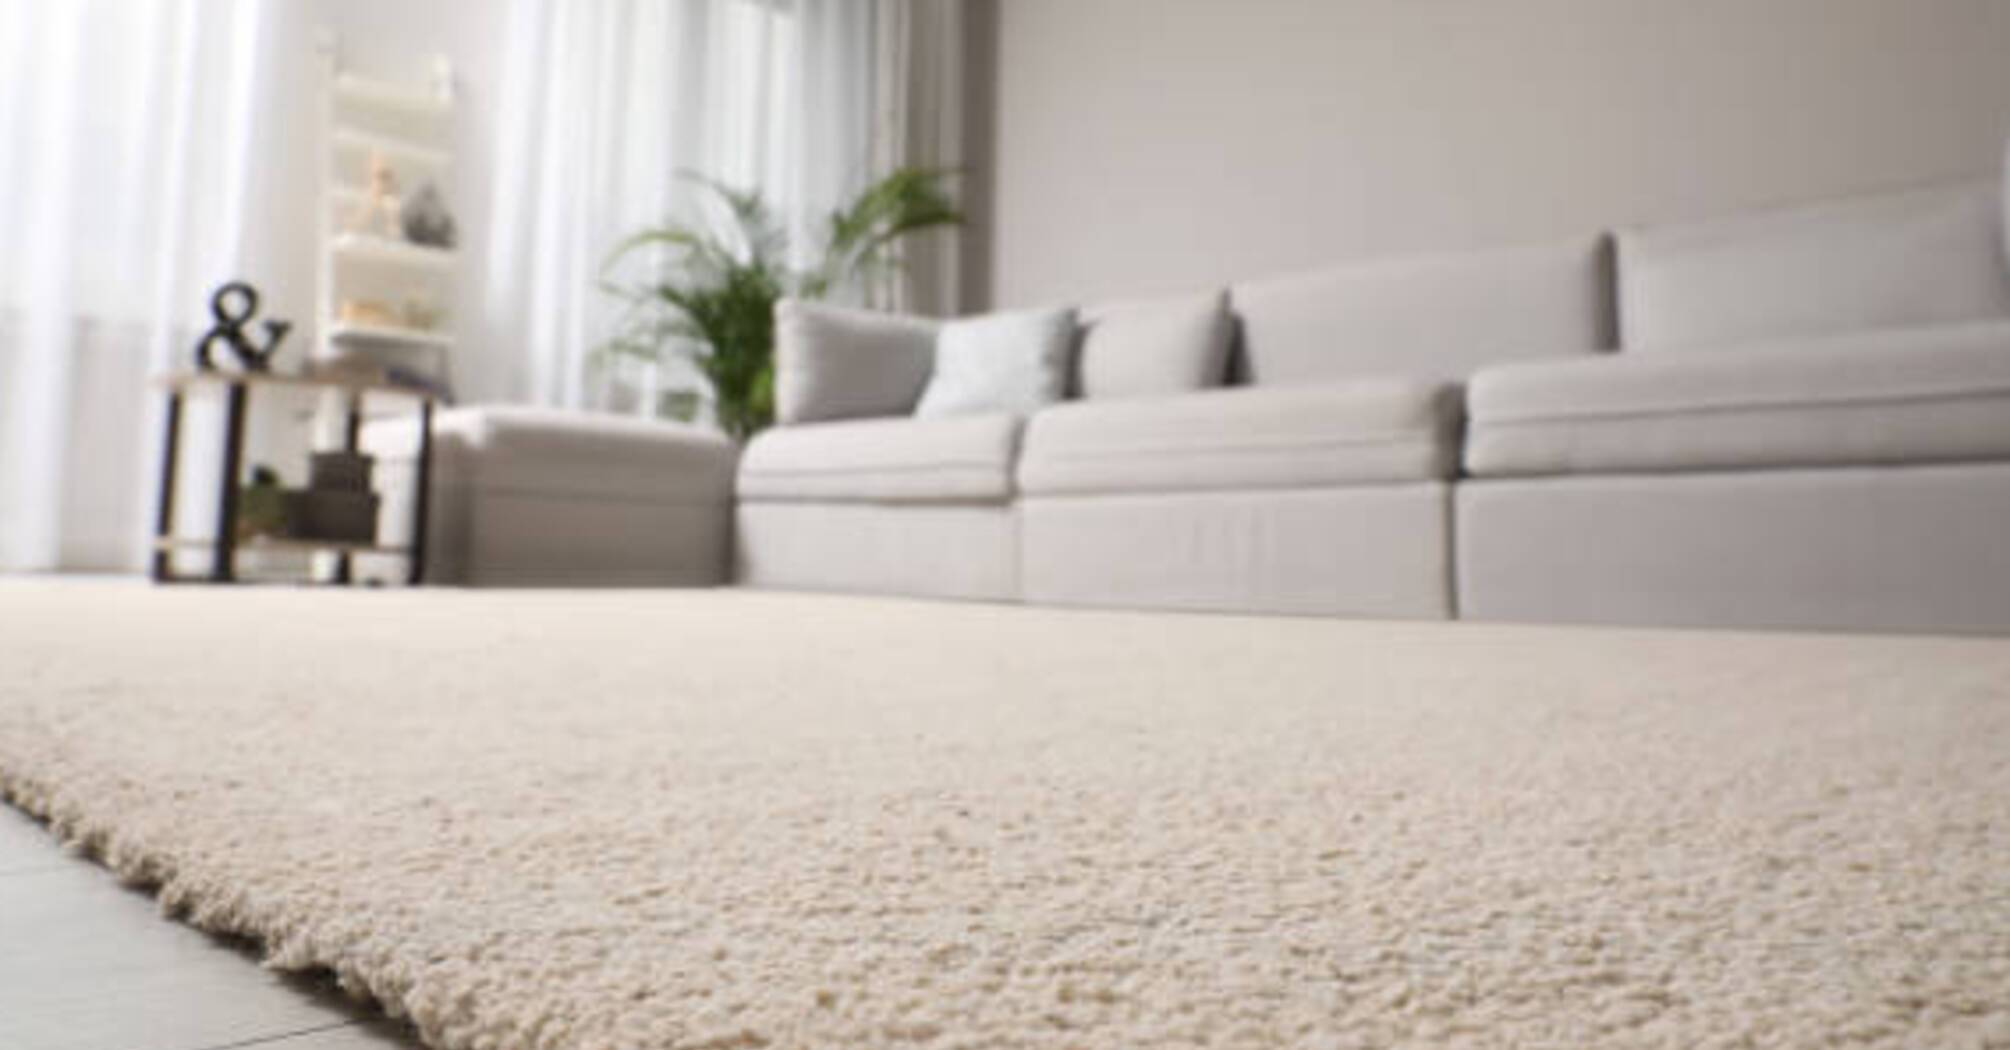 Carpet or carpeting: The best option for your home